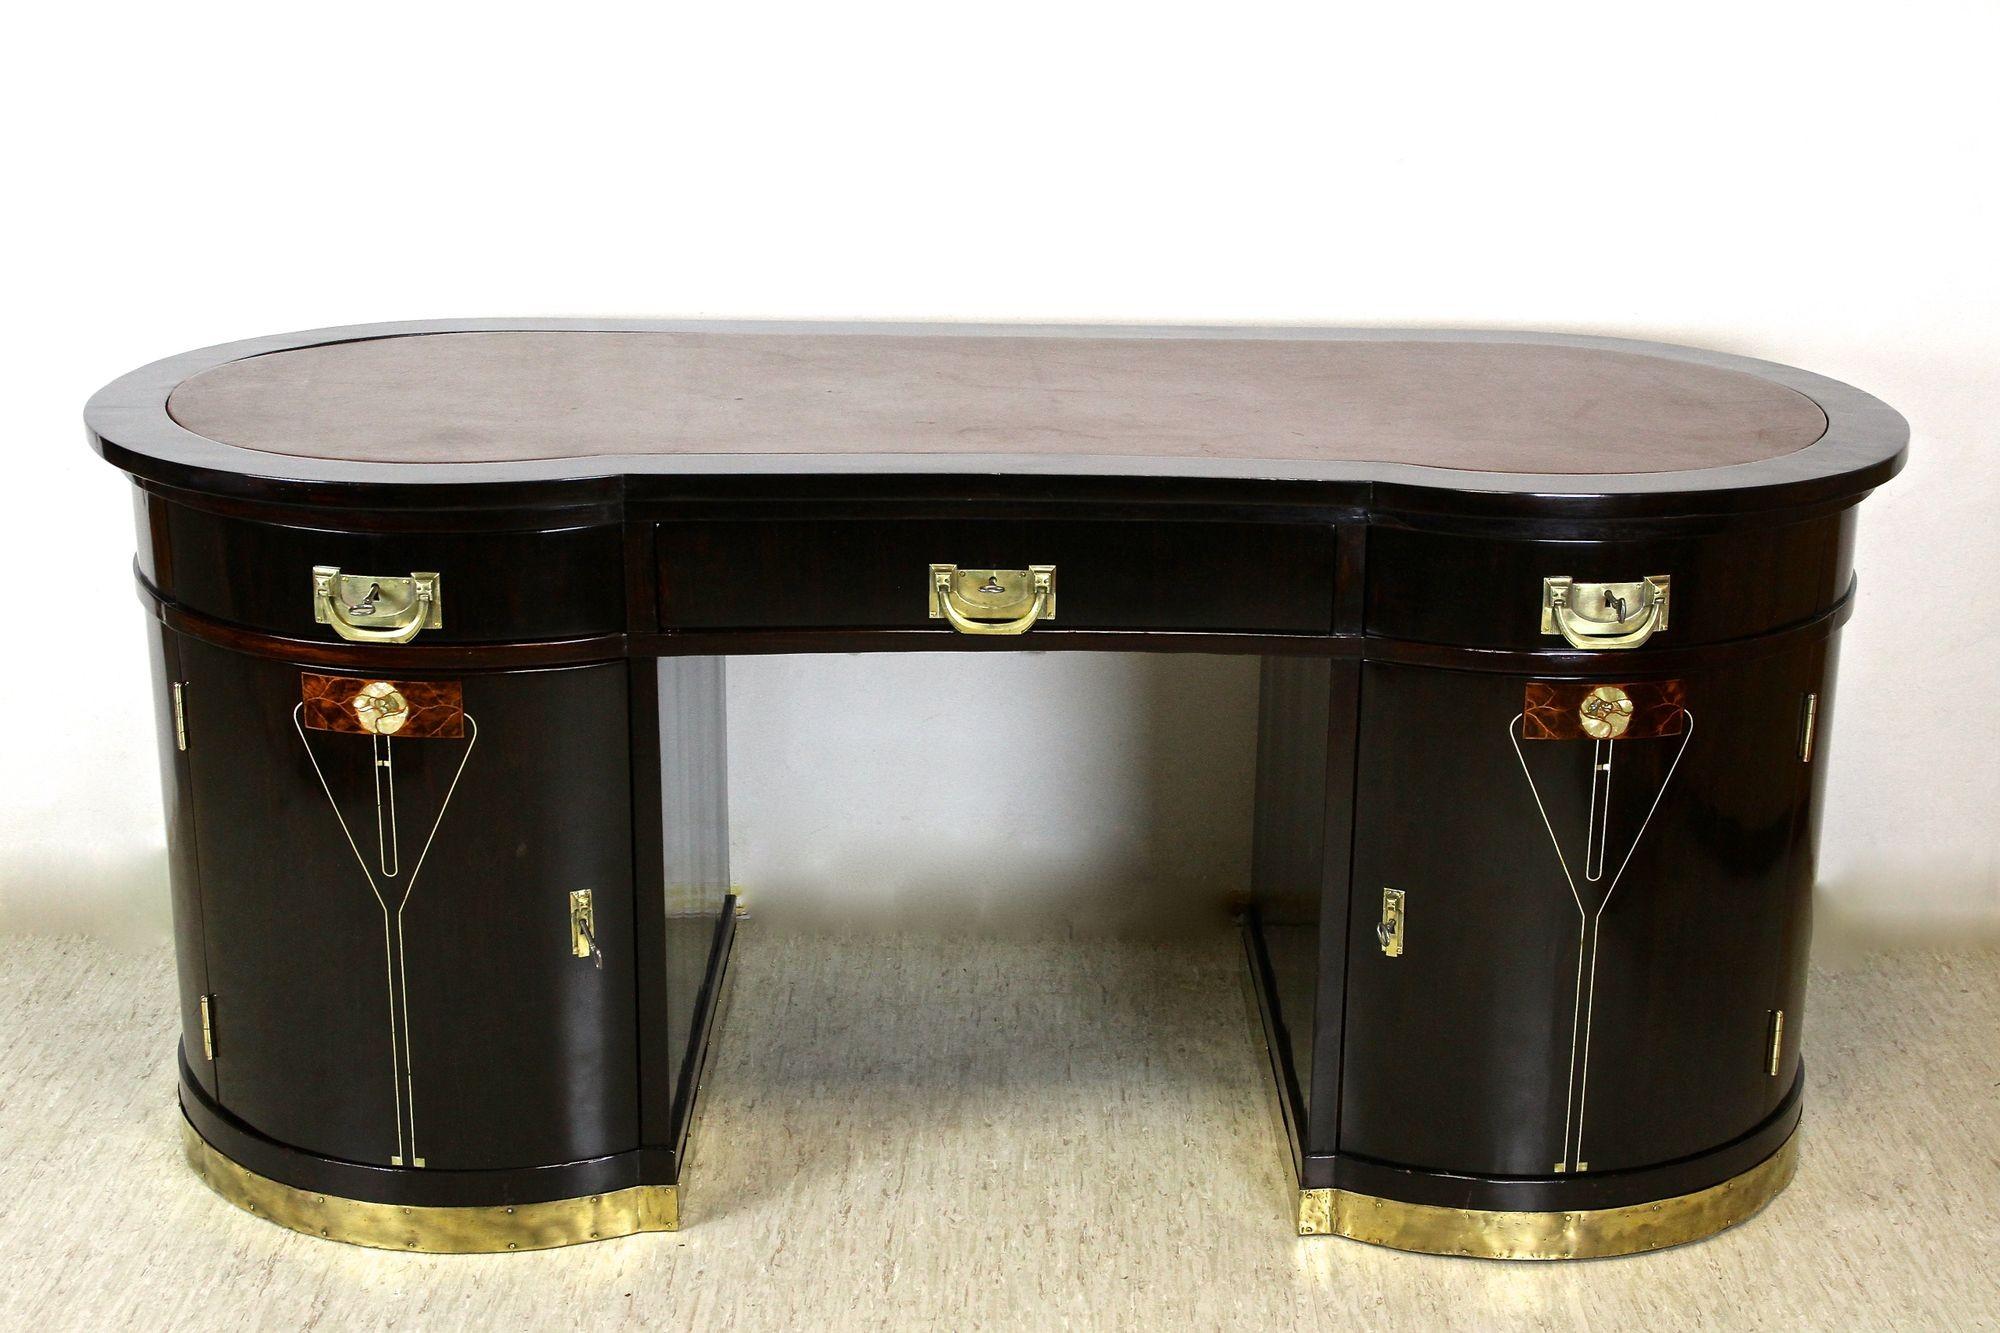 Breathtaking, one of kind Art Nouveau Palisander Writing Desk from the very early 20th century in Vienna around 1905. This impressive antique desk is not just a 